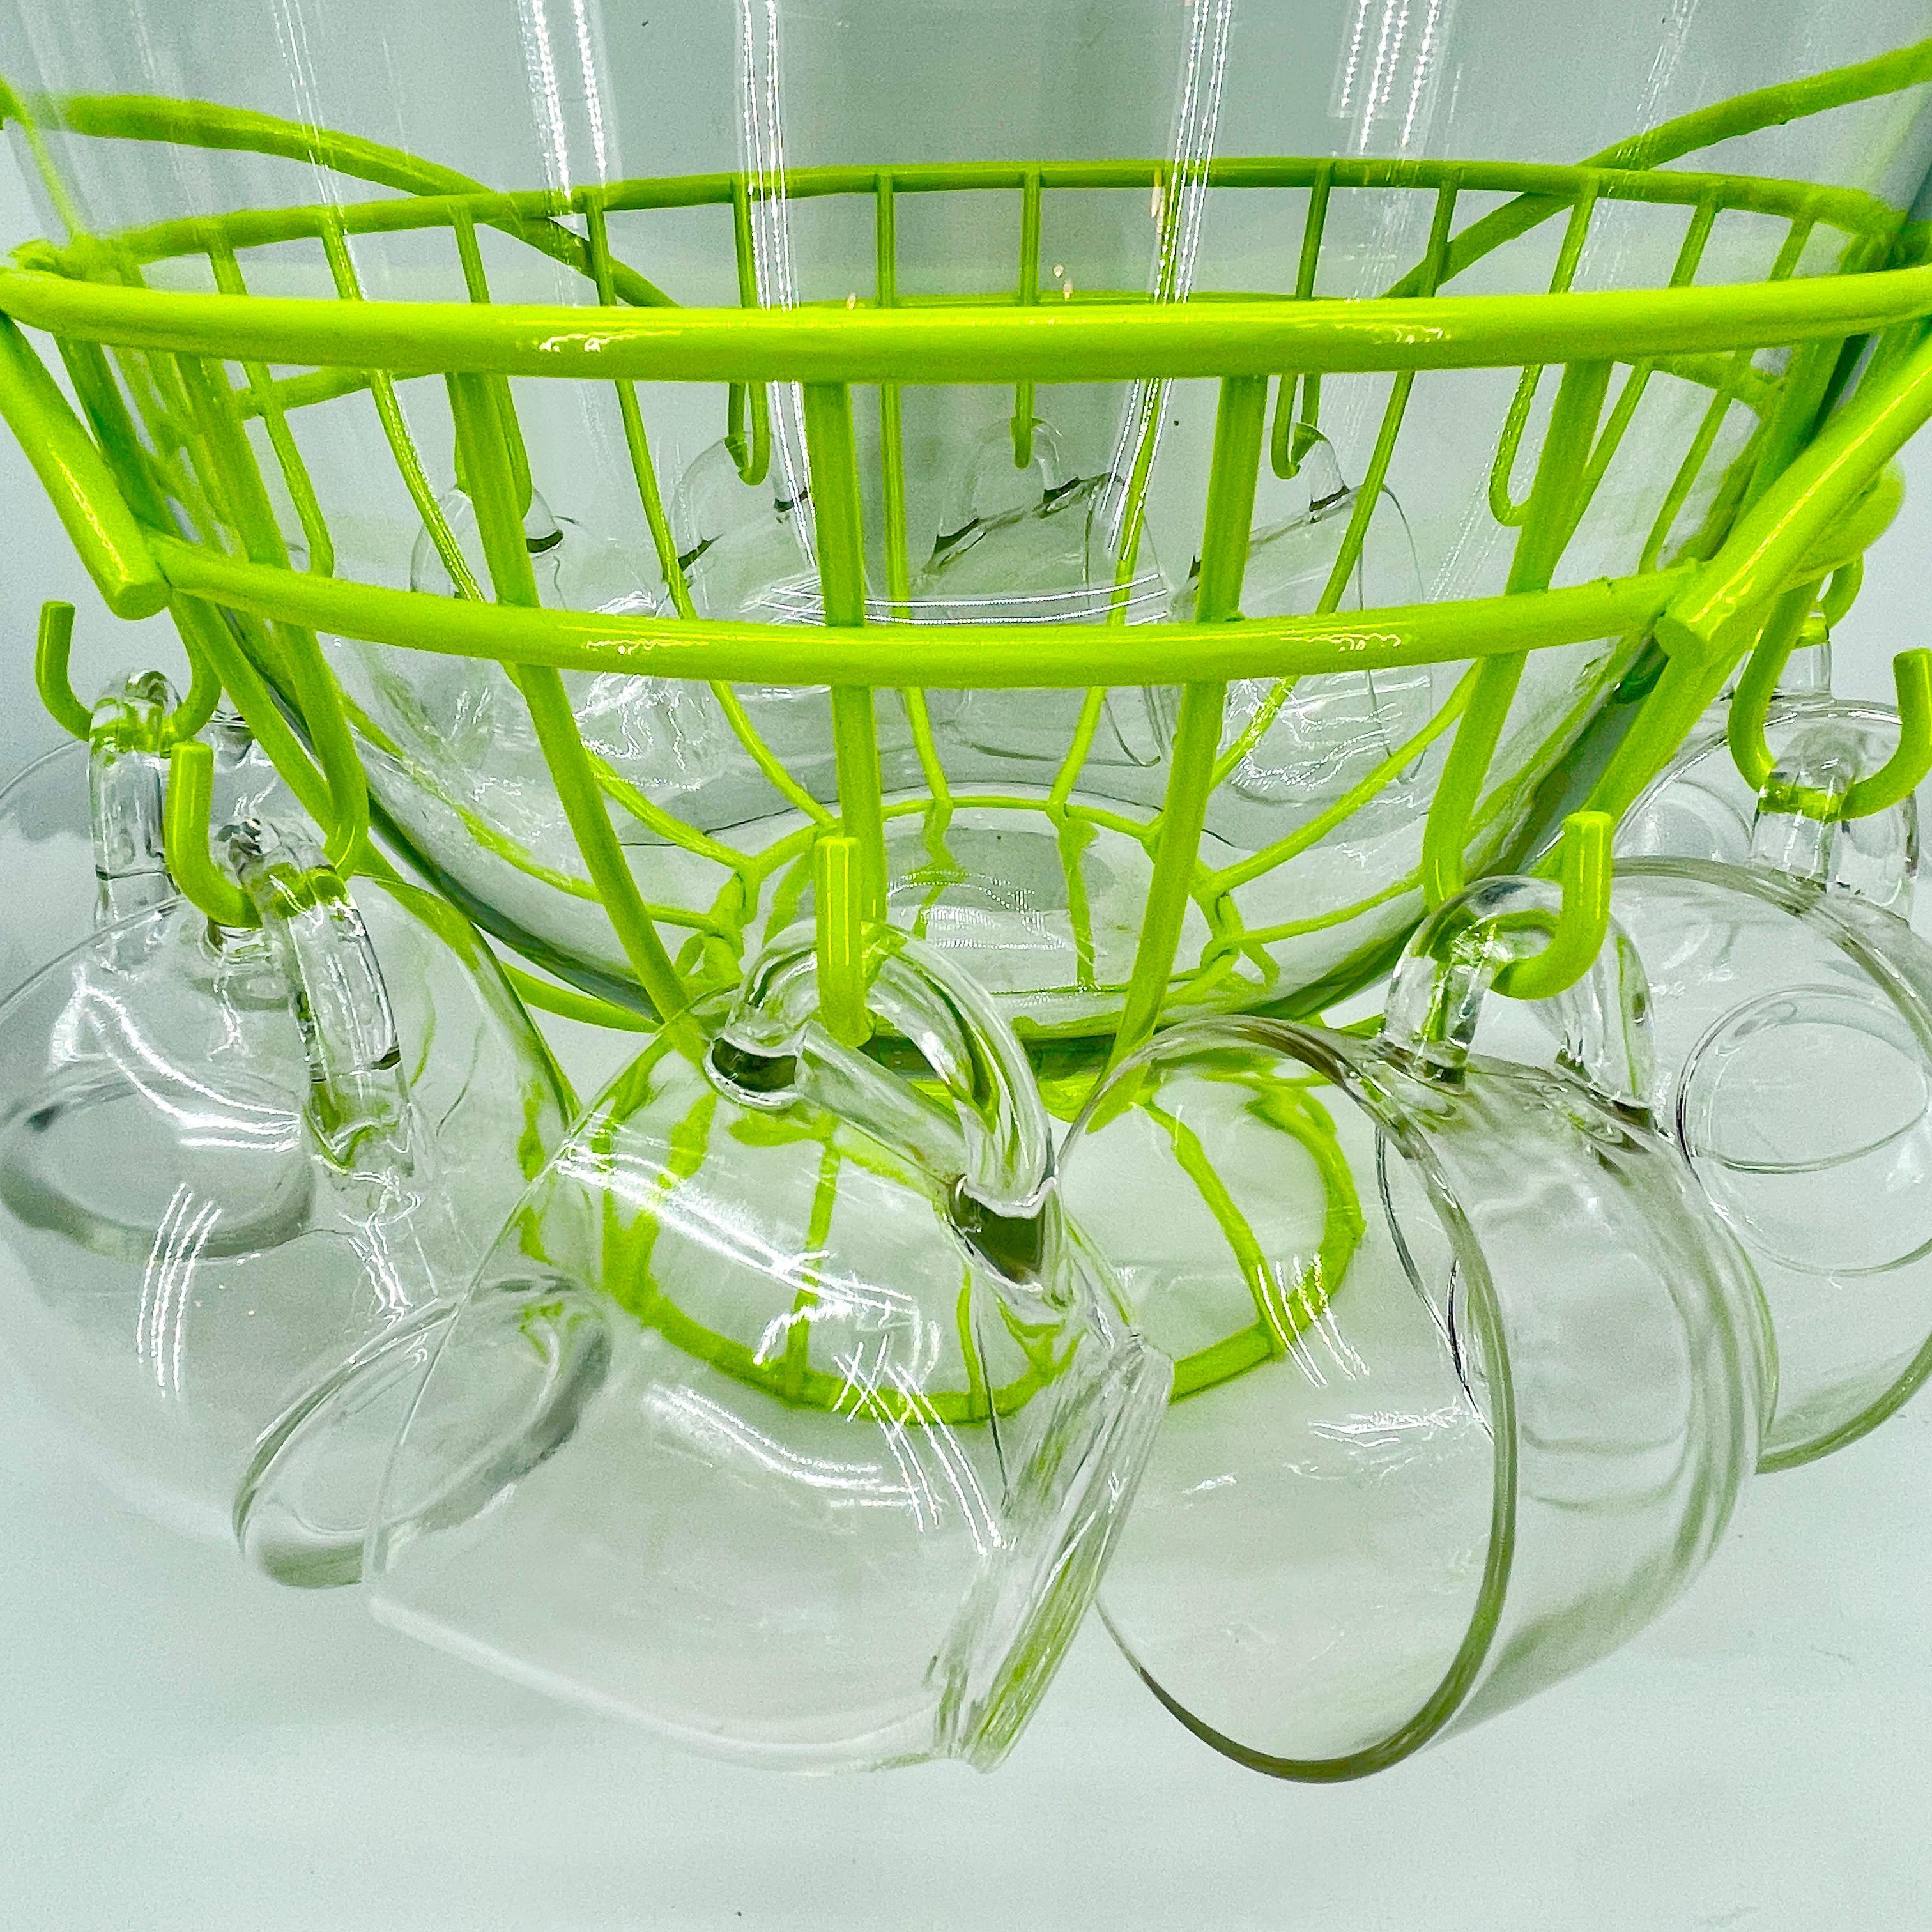 Powder-Coated Mid-Century Modern Punch Bowl Set, Powder Coated Caddy Chartreuse